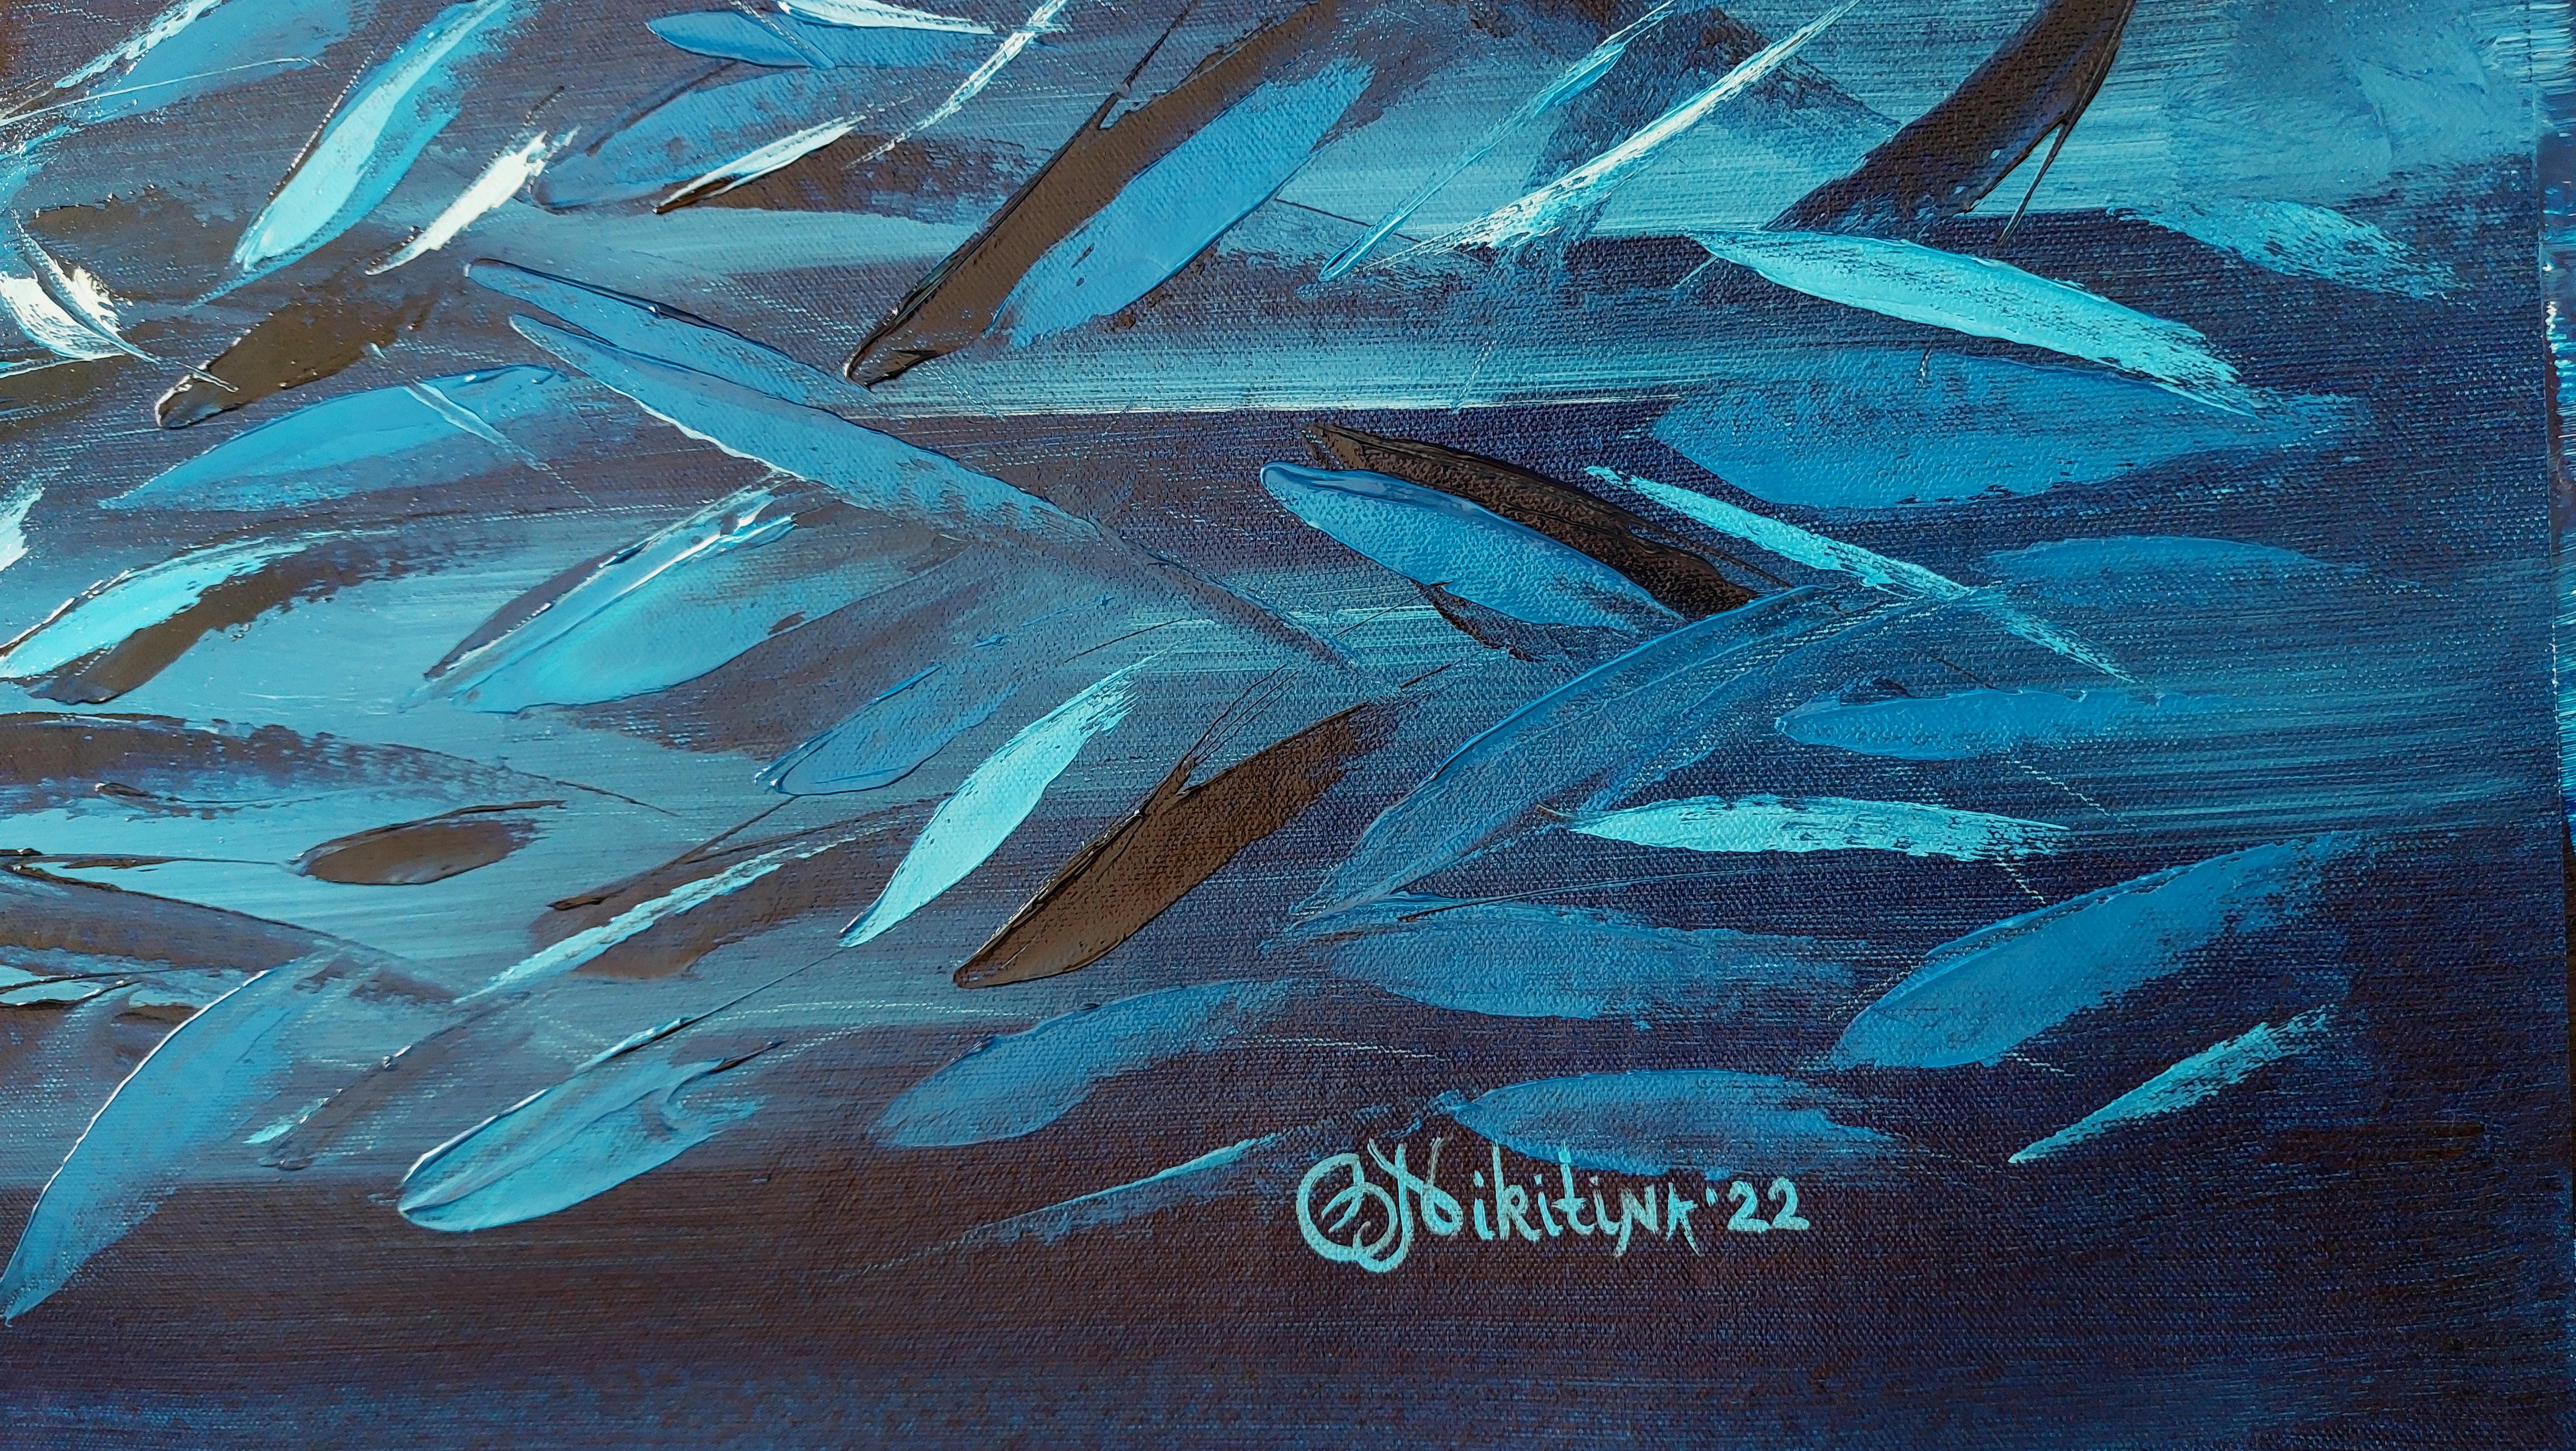 Blue Fish Stream Underwater Painting Sardines 100% original art by Olga Nikitina
5% from the cost I use for Charity to protect ocean environment.
* Title: Blue Fish
* Size: 50 by 28 inches, 127x72cm
* Materials: oil, unmounted canvas, palette